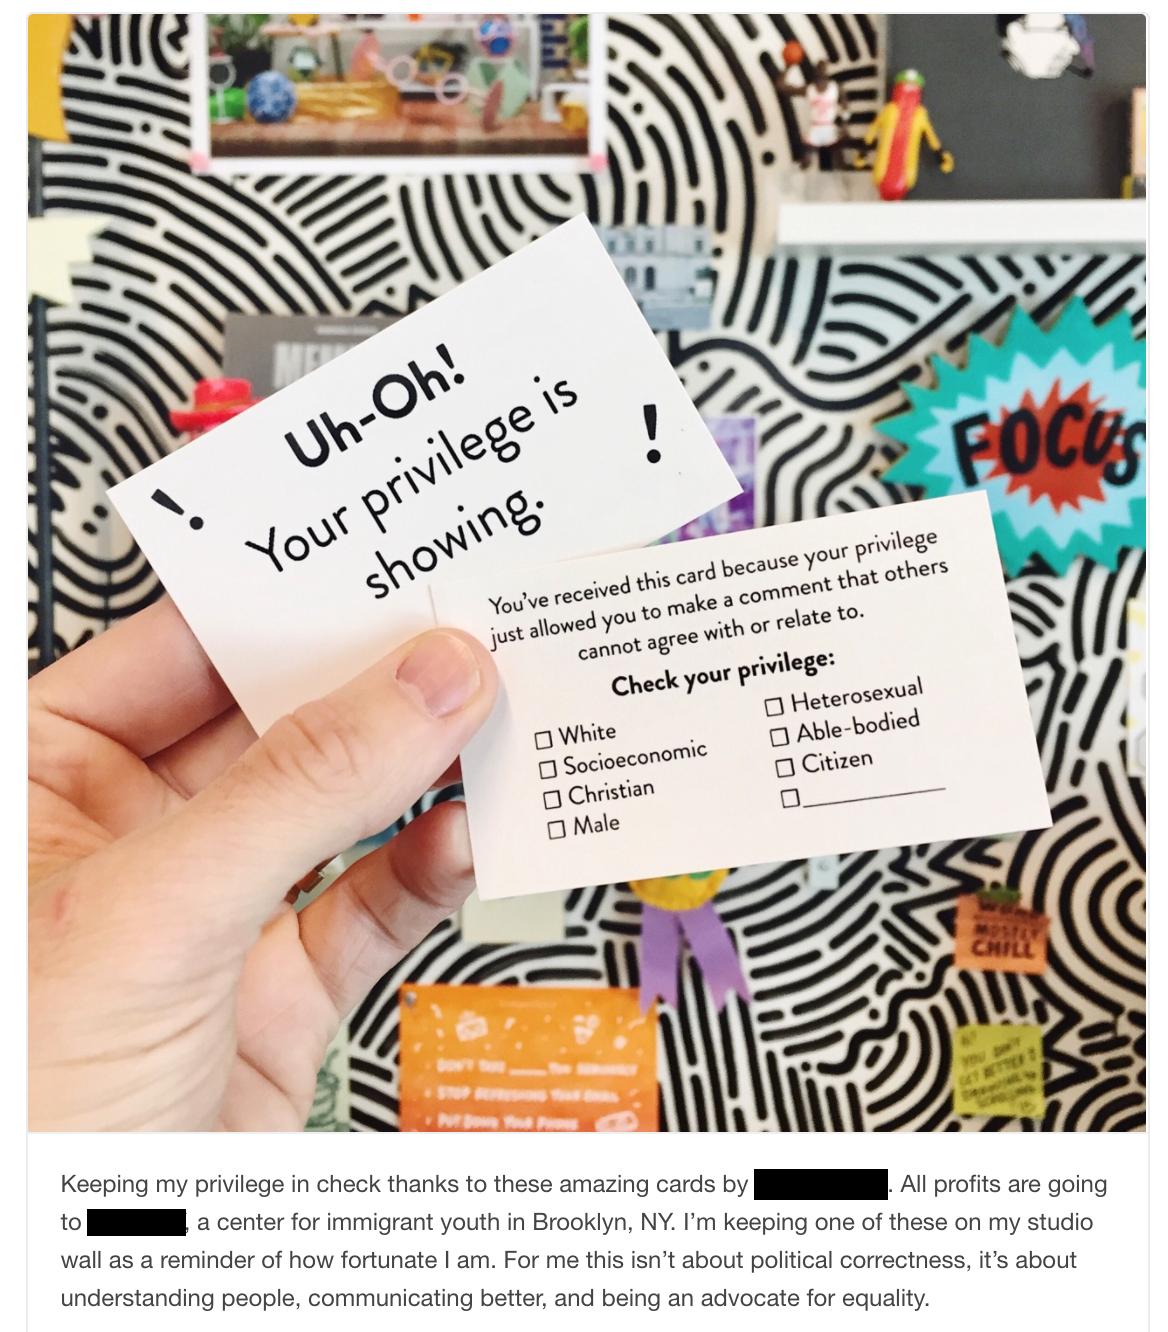 orange - UhOh! Your privilege is showing. You've received this card because your privilege just allowed you to make a comment that others cannot agree with or relate to. Check your privilege o White o Heterosexual o Socioeconomic Ablebodied o Christian Ci